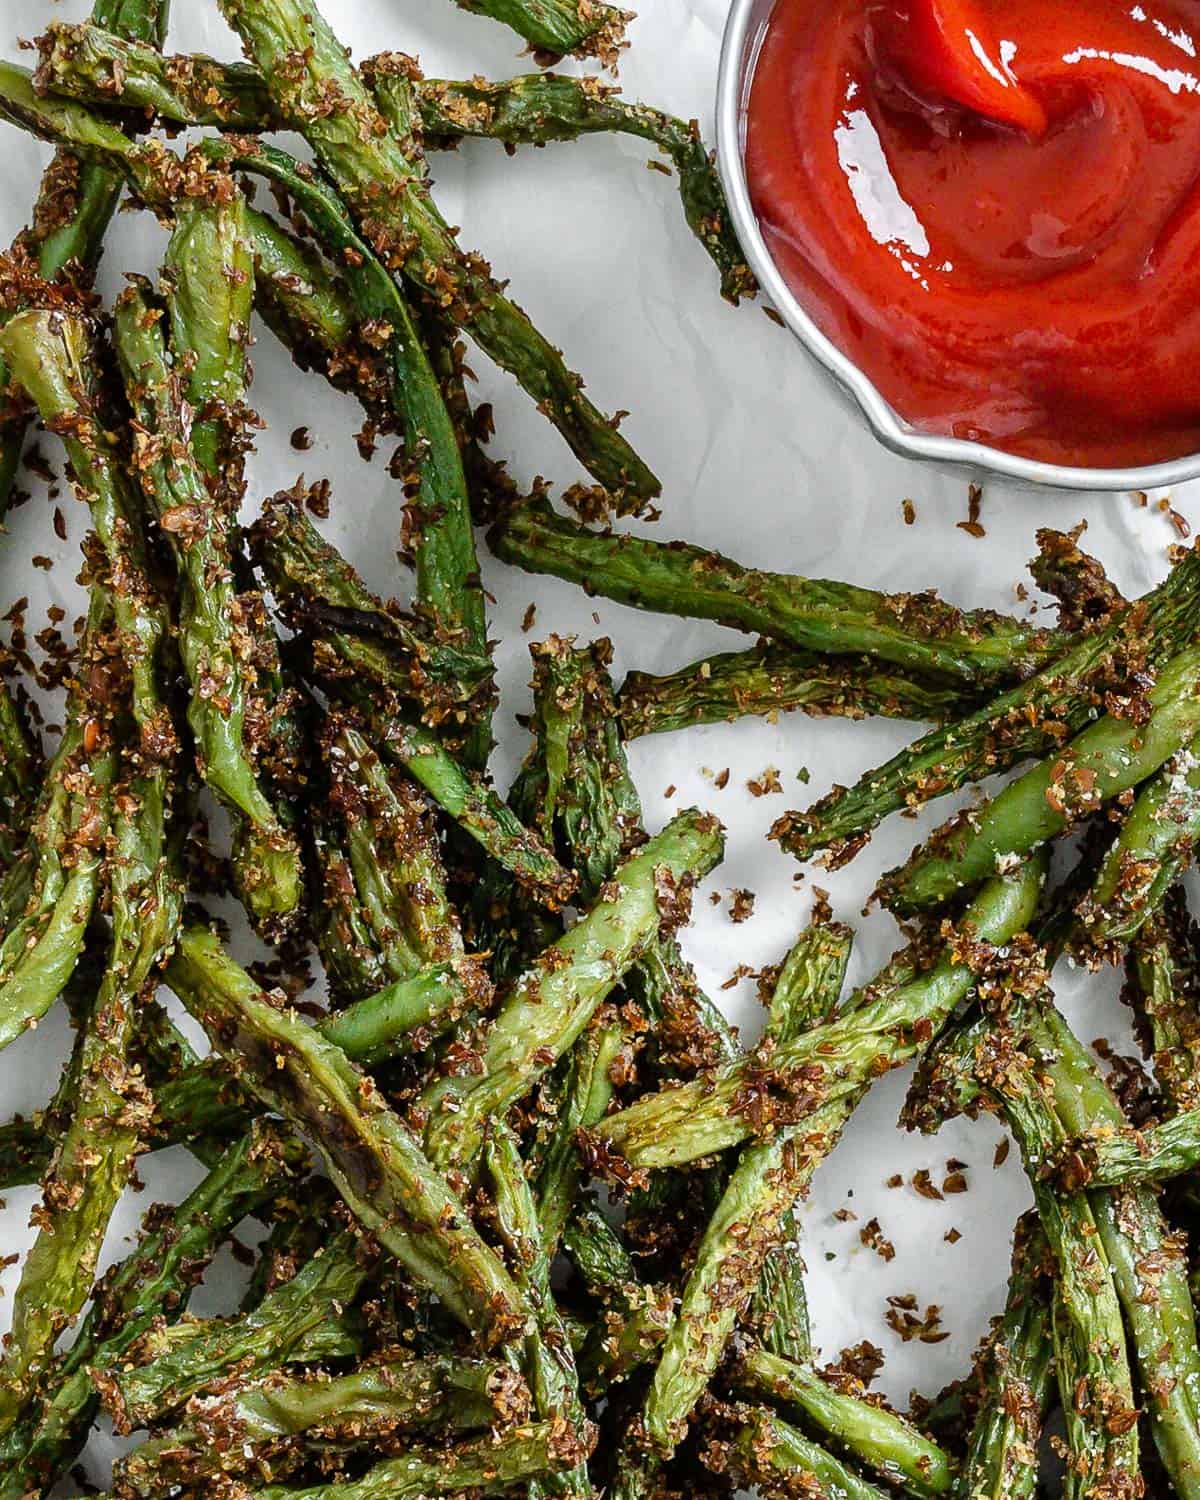 completed Crispy Green Bean Fries scattered on a white surface alongside ketchup